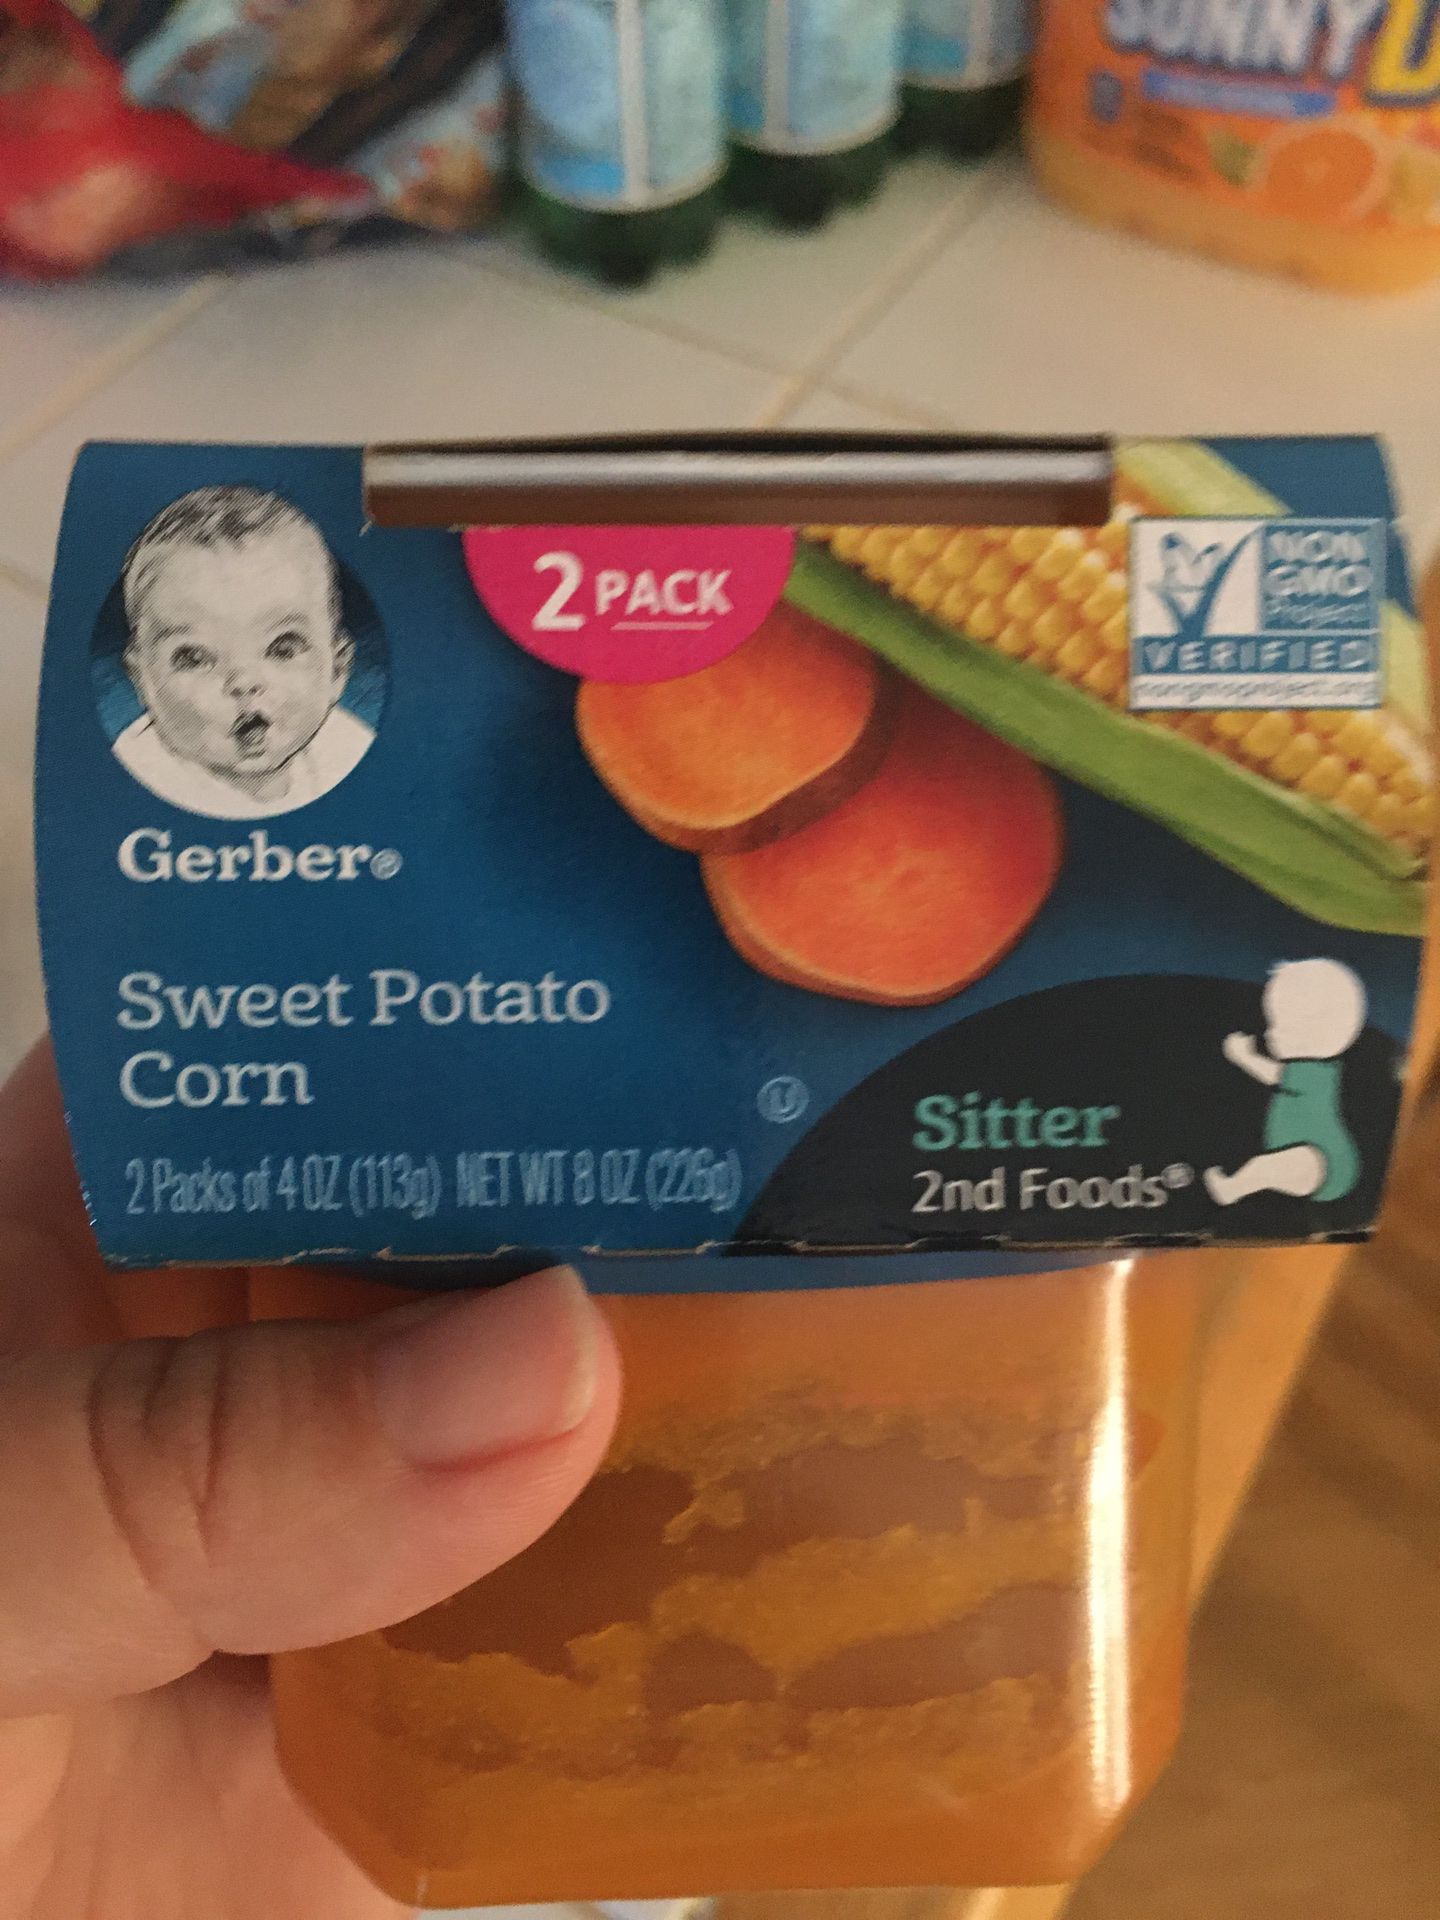 Free Baby food expired 2/21